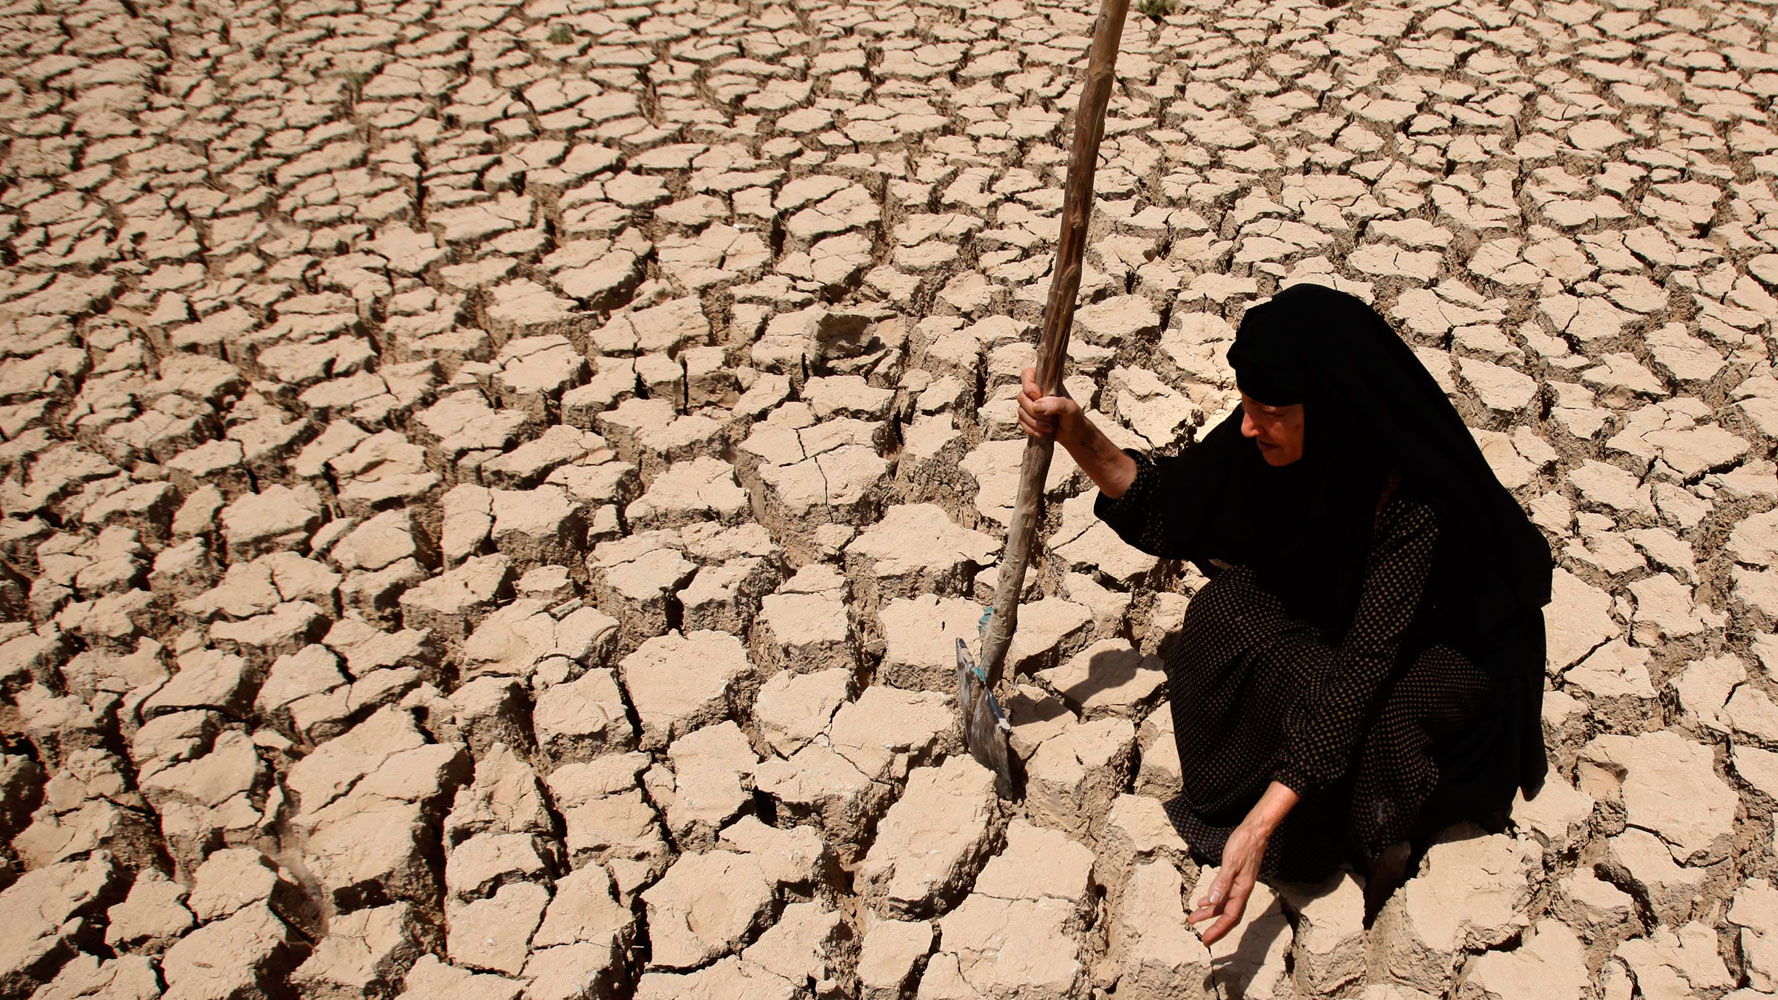 Citizens living in Iran are mostly affected by the water crisis